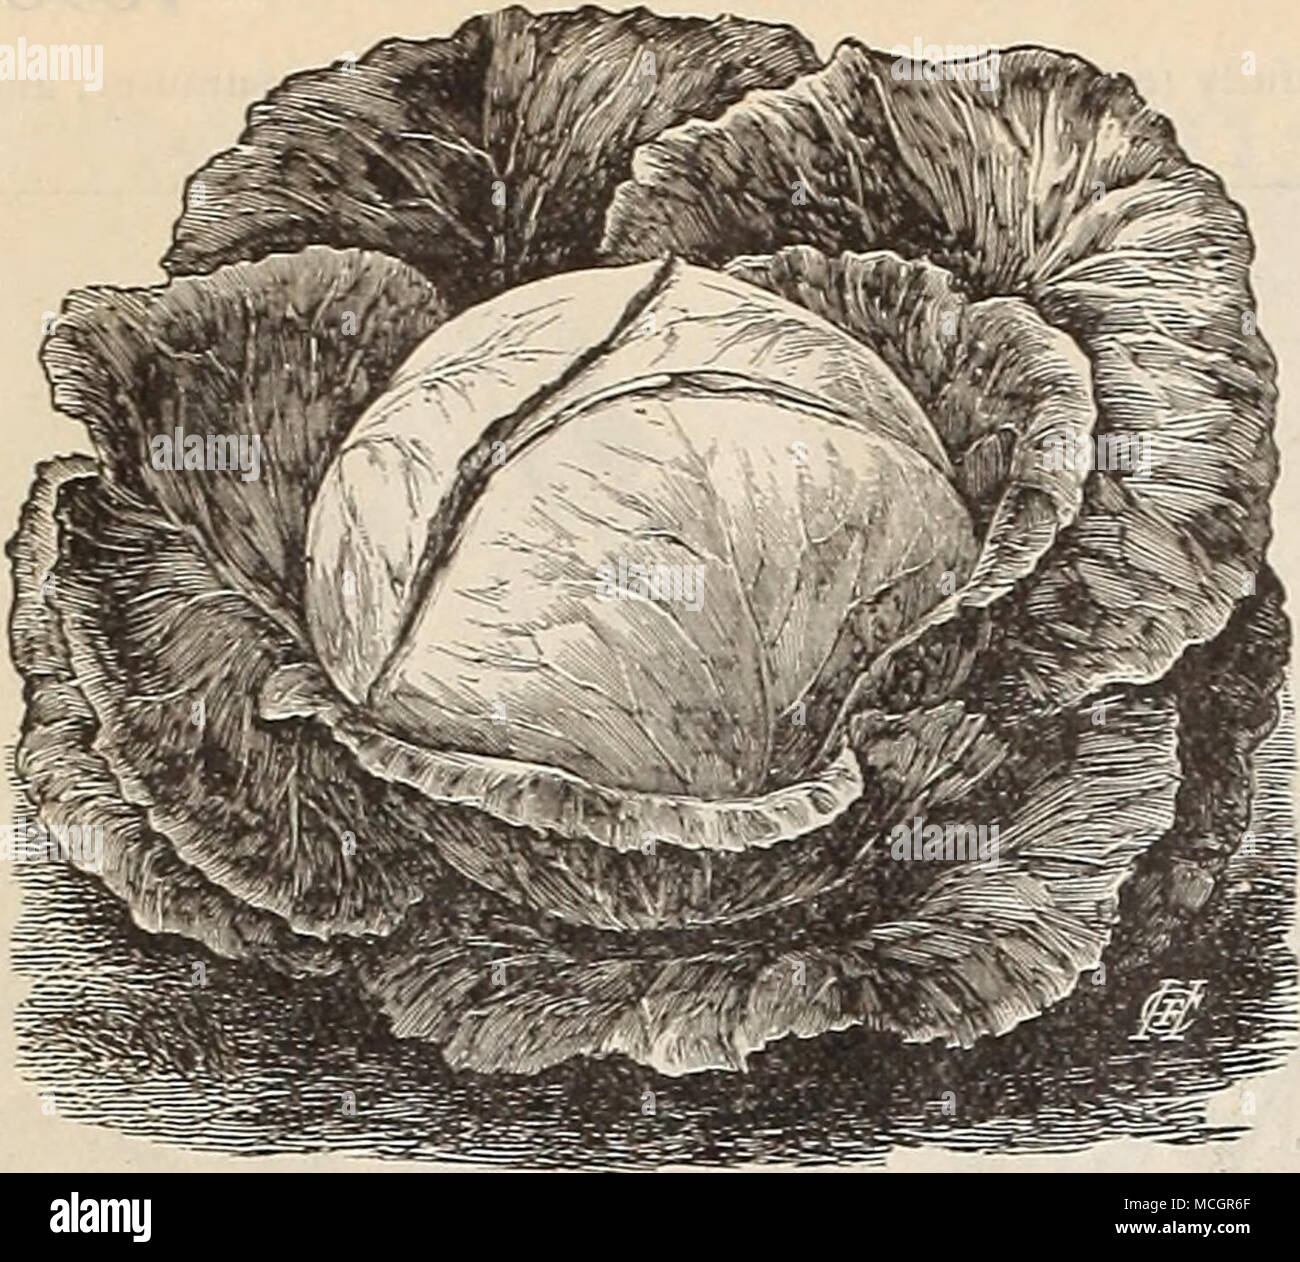 . Cabbage, •' Golden Sugar Winter. CELERY. New Golden Rose Self=blanching. In character this va- riety is identical with the (jolden Self-blanching, except the color, which IS a beautiful rosy tinge, shading to very pale pink at top of stalk ; the ribs lie prominent and the ^tein thick, solid and biutle; being of hardy nature, it possesses good keeping qualities. While It is very ornamental, veiy early, and positively self-blanching.it bleaches to a beautiful golden- yellow at the heart after storing for winter. It CABBAGE—Golden Sugar Winter. This excellent v.iriety was introduced in Europe f Stock Photo